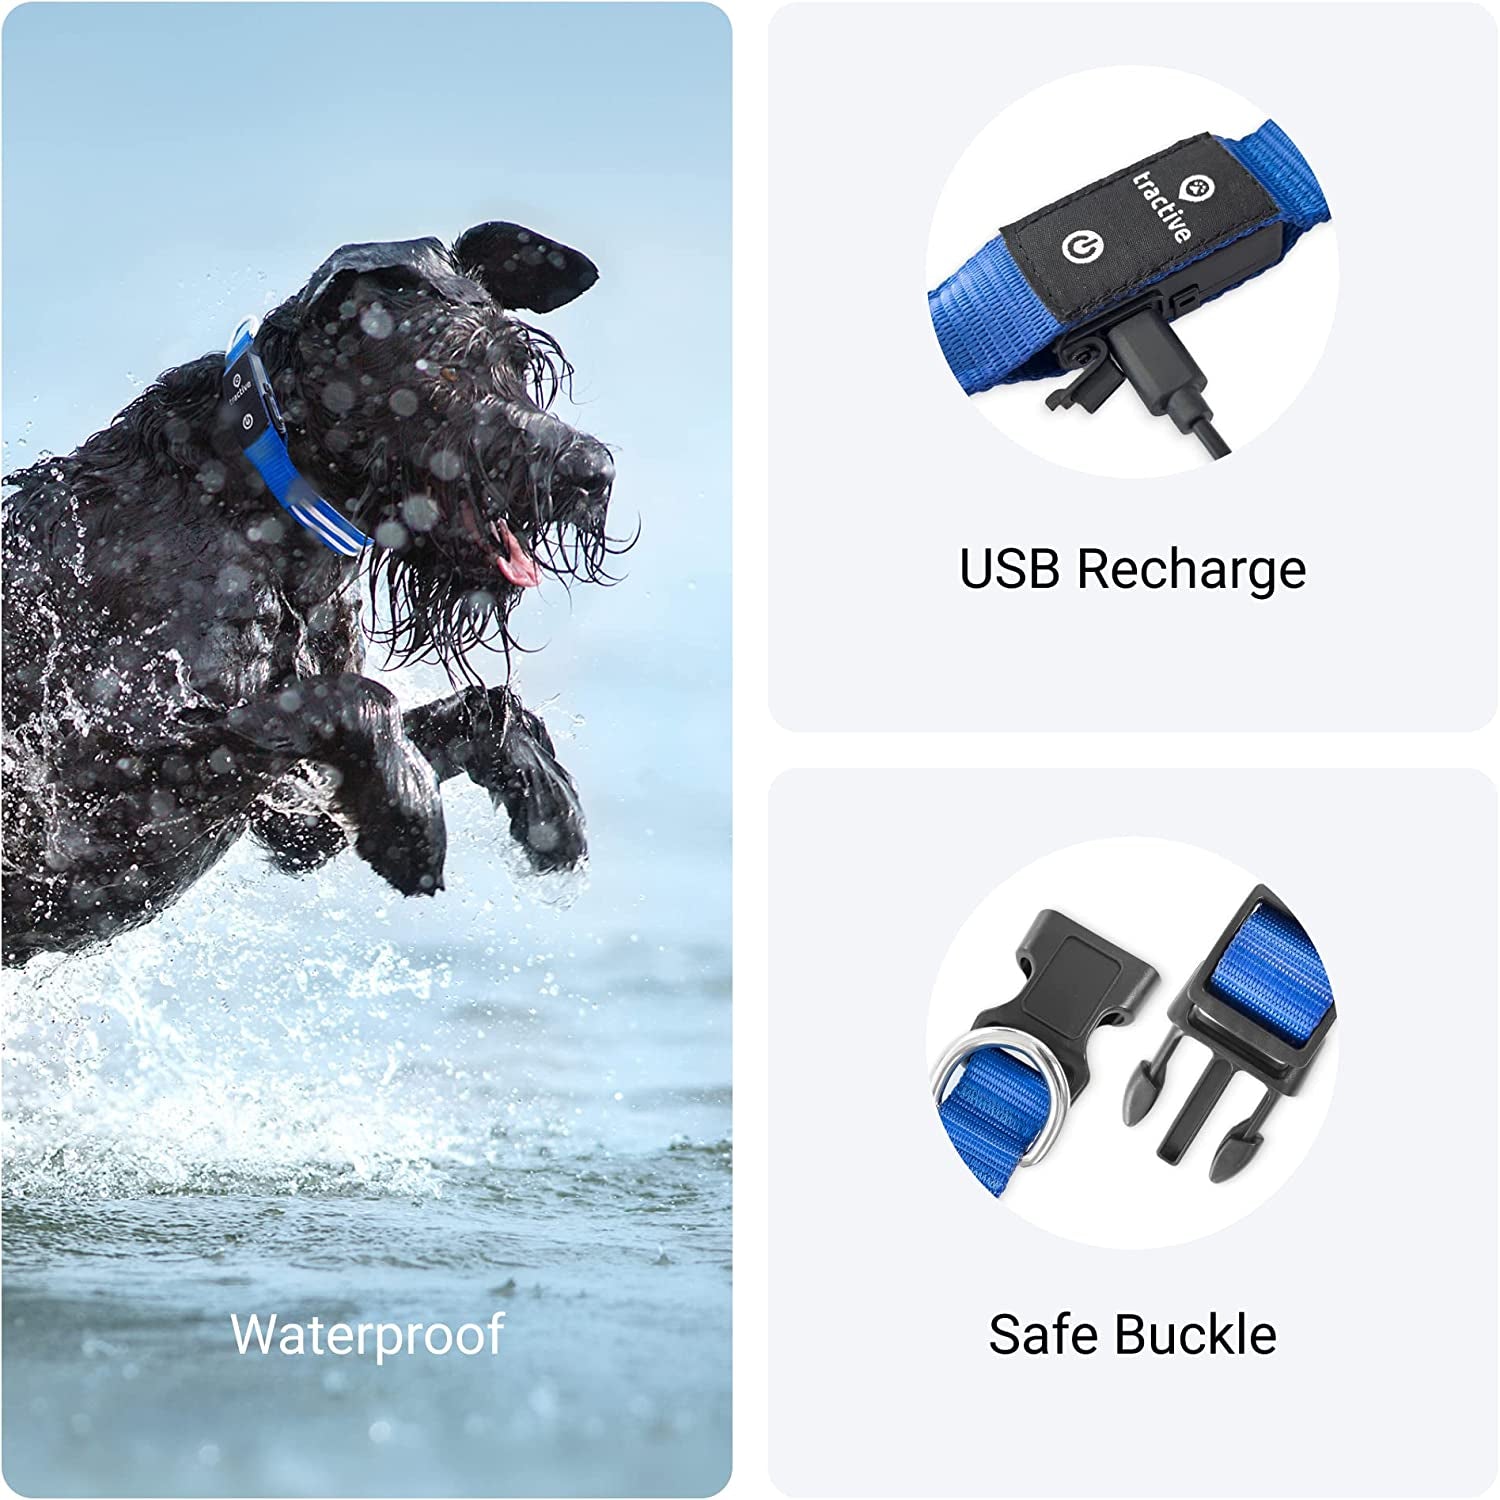 LED Light up Dog Collar - Waterproof & Rechargeable 3 Light Modes for Night Walking